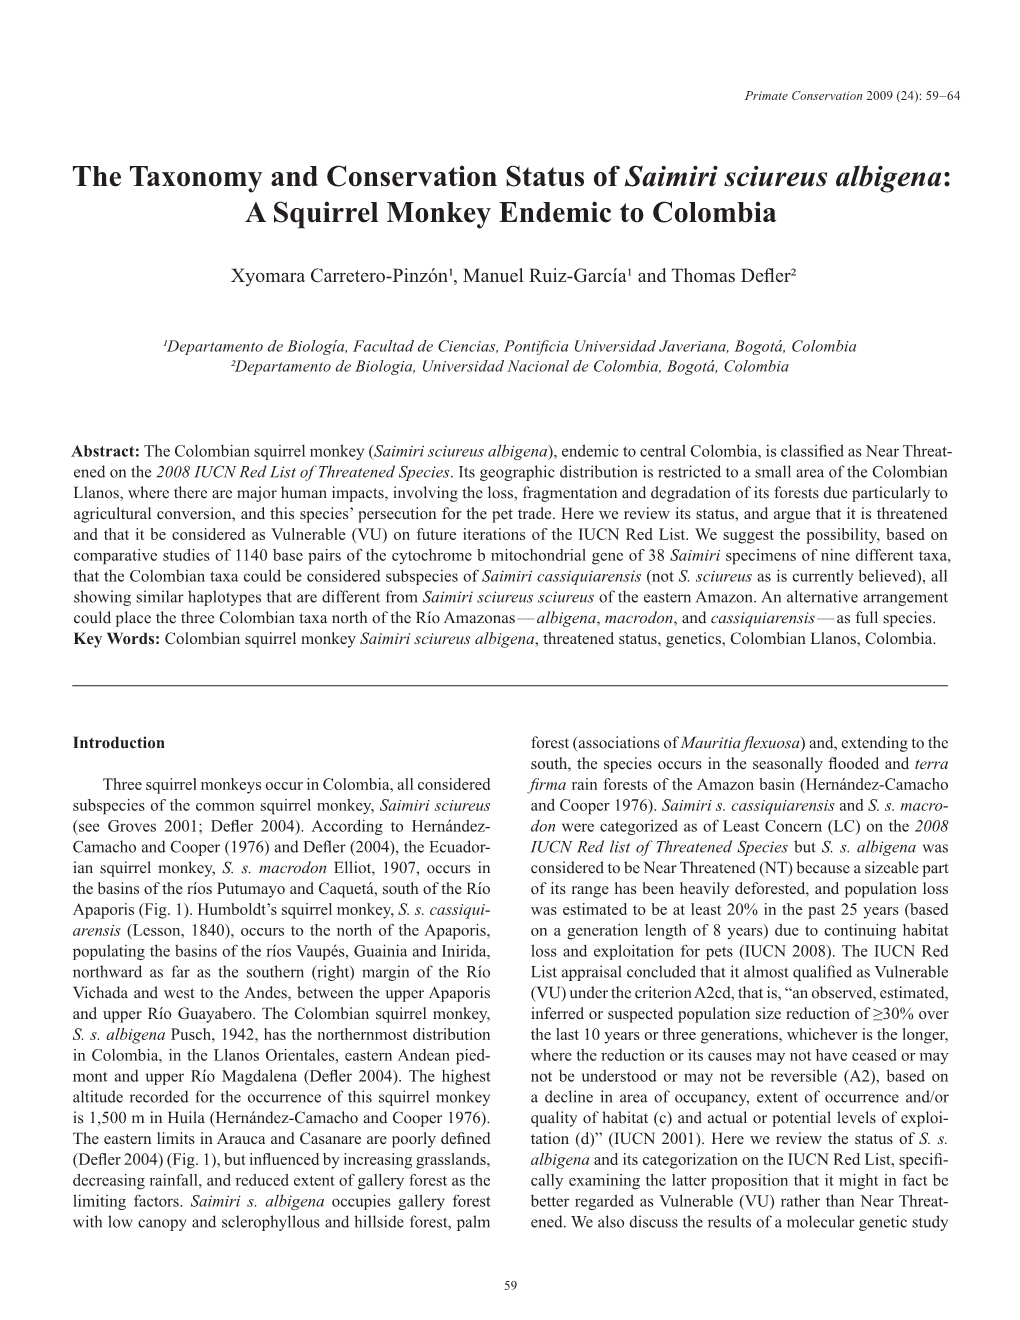 The Taxonomy and Conservation Status of Saimiri Sciureus Albigena: a Squirrel Monkey Endemic to Colombia